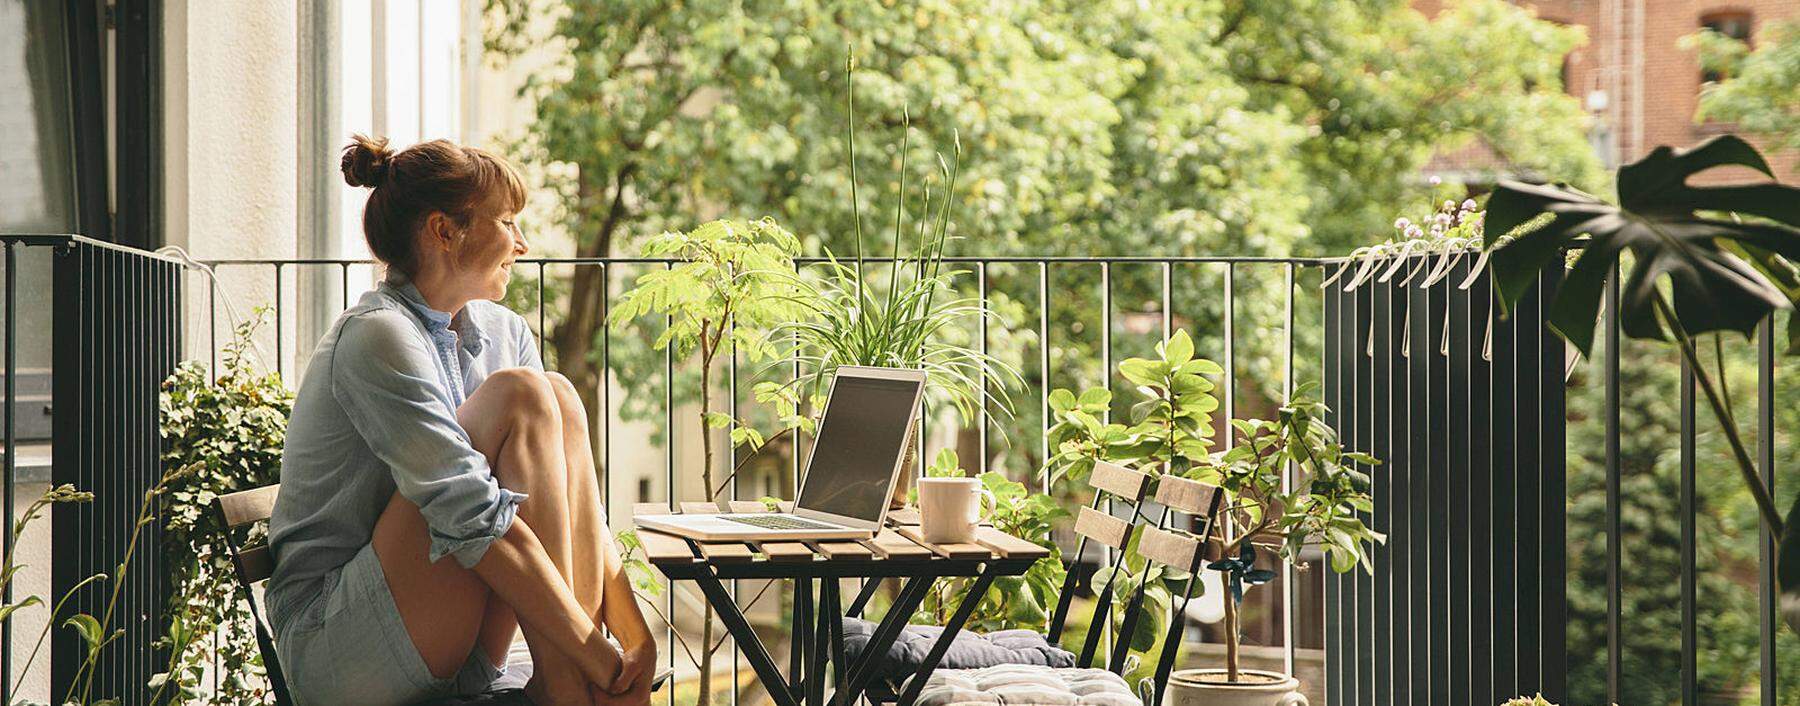 Smiling woman looking at her laptop on balcony model released Symbolfoto property released PUBLICATI